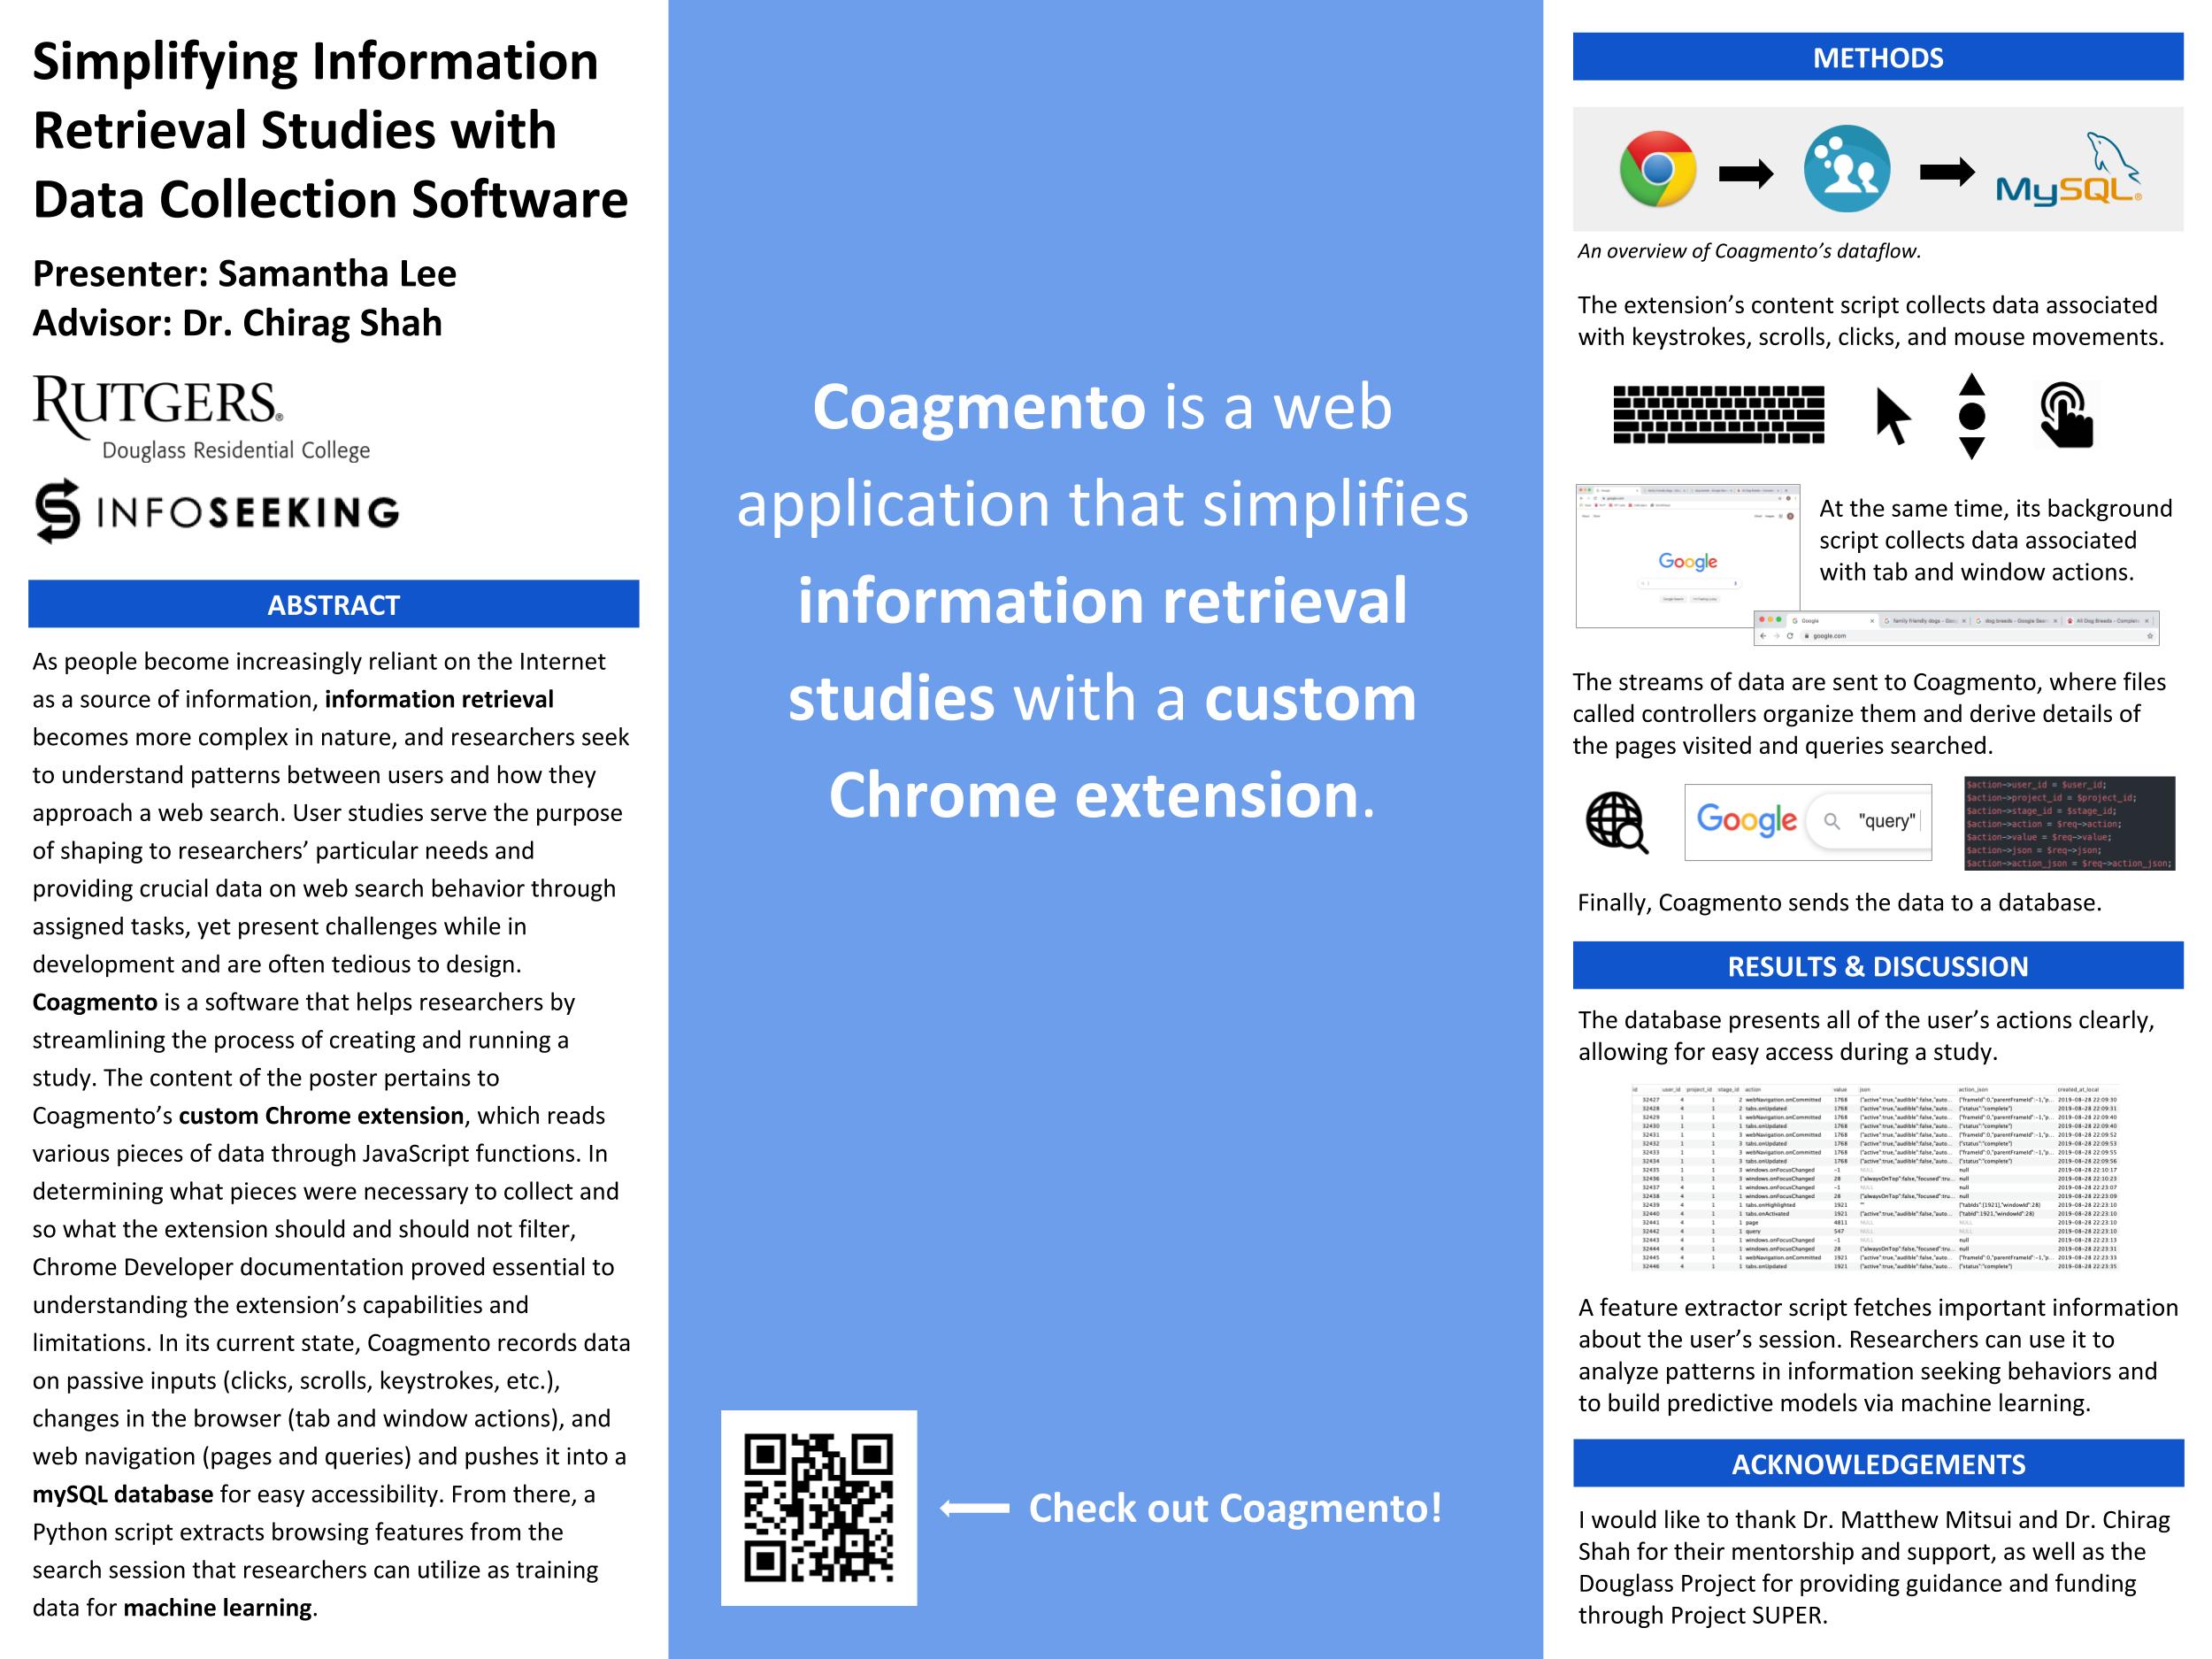 A research symposium poster detailing Sam's work developing a Chrome extension for Coagmento. It links to a PDF version.